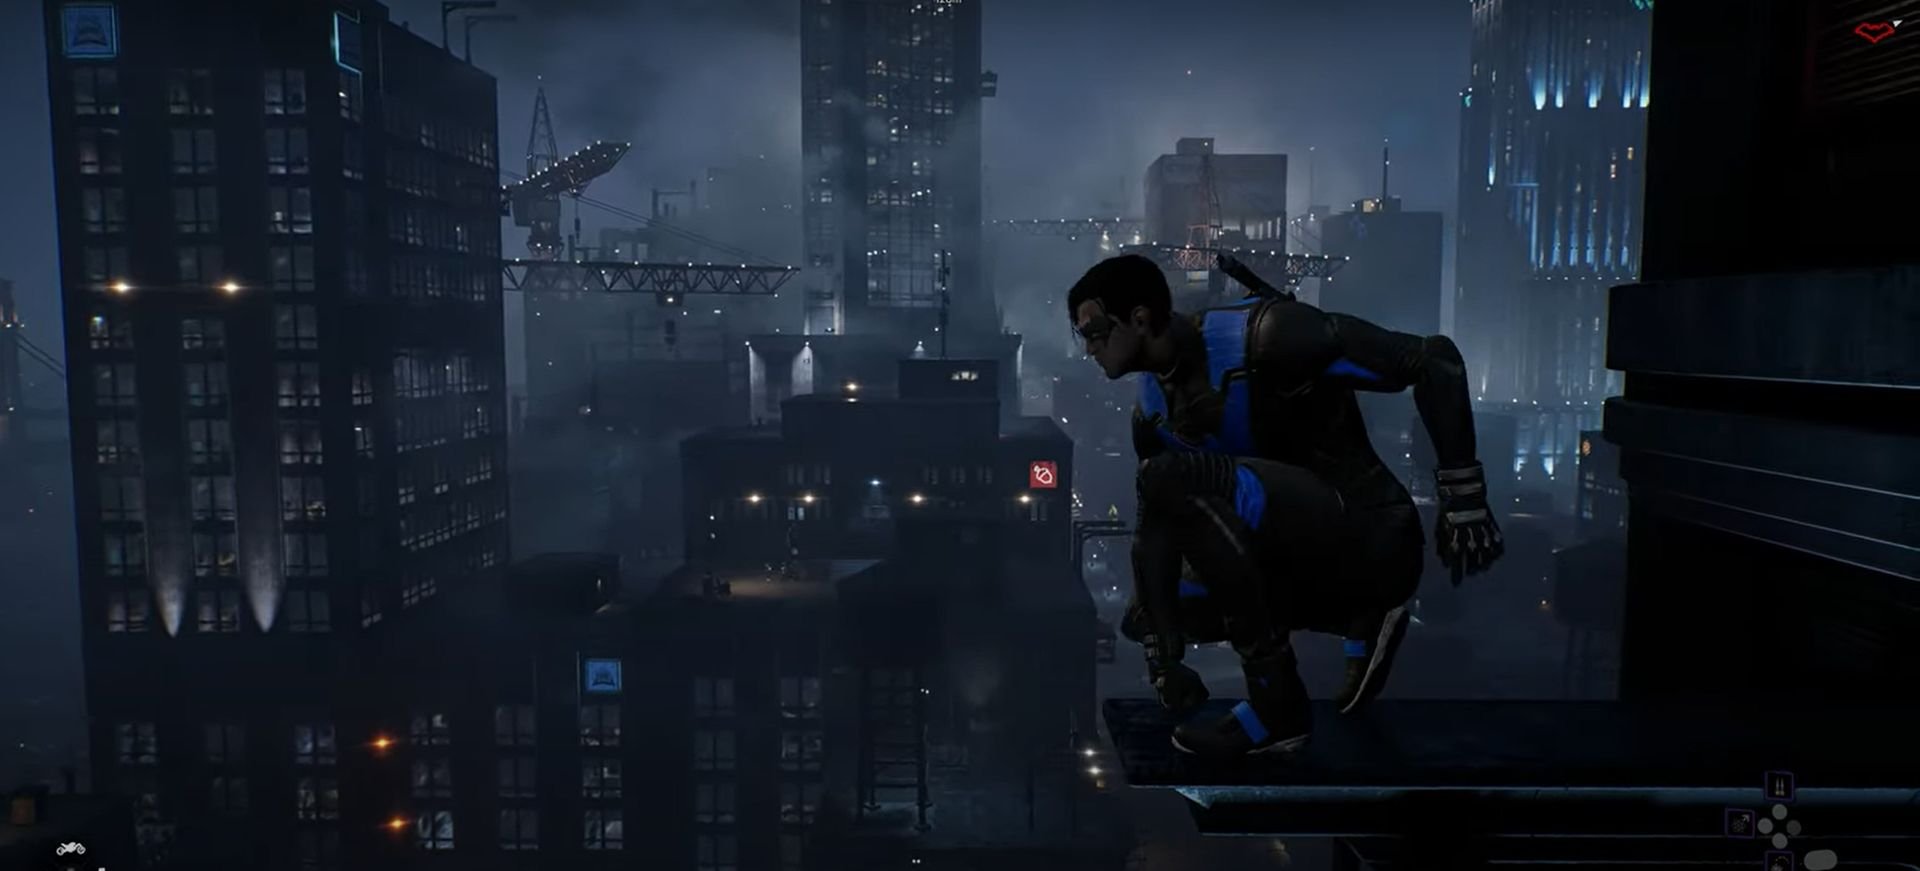 Gotham Knights Gameplay Video Showcases Nightwing and Red Hood